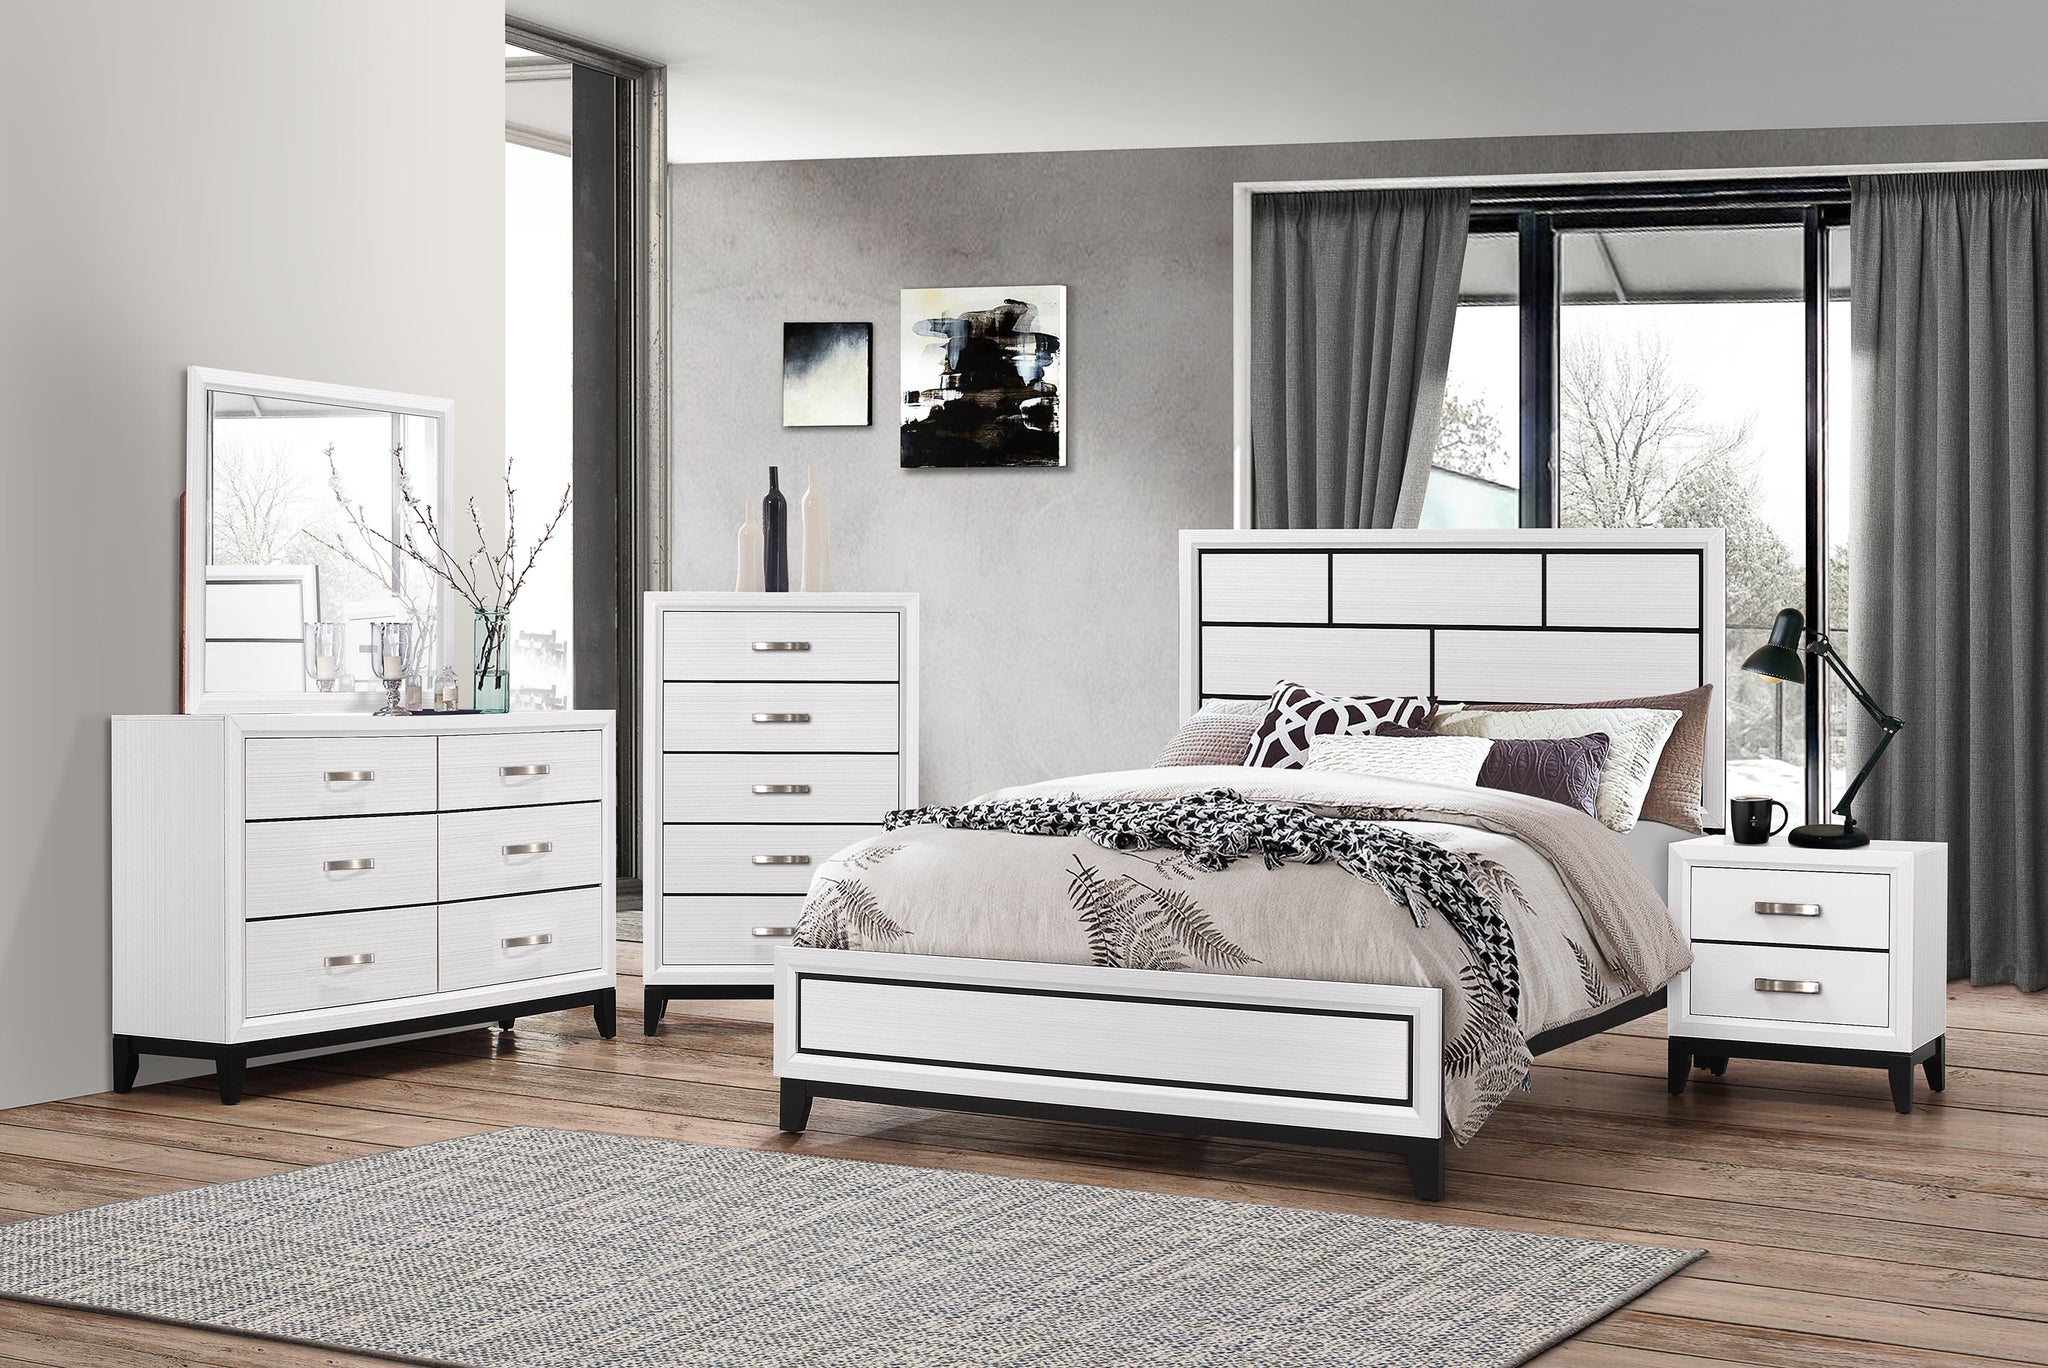 Best Of 56+ Exquisite furniture source bedroom set Top Choices Of Architects